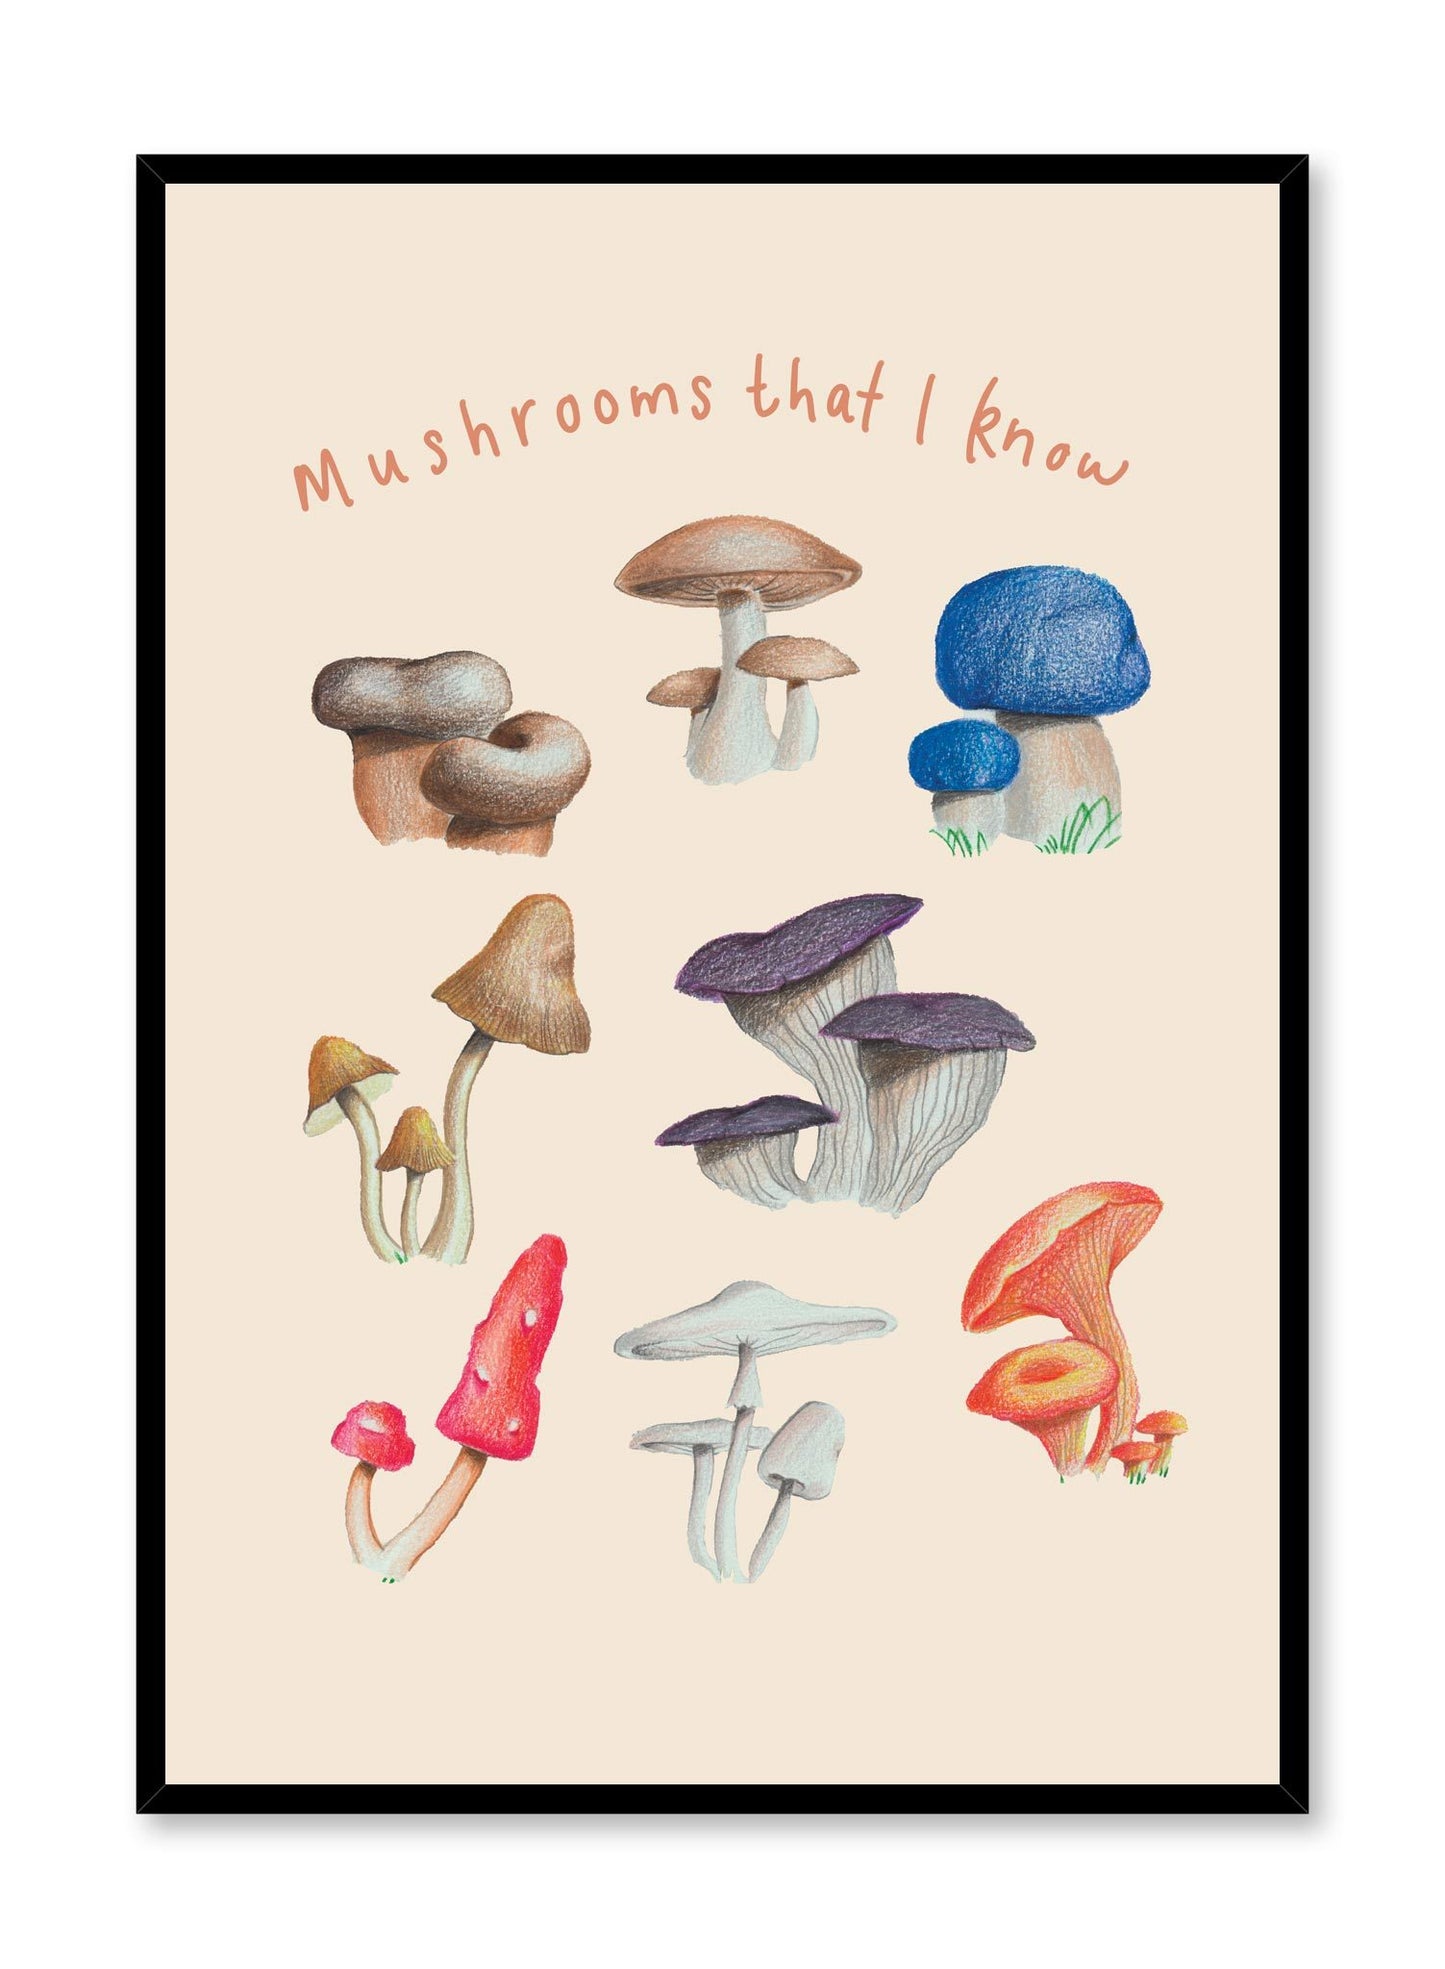 Mushroom Harvest is a minimalist illustration by Opposite Wall of an assortment of different types and colours of mushrooms.